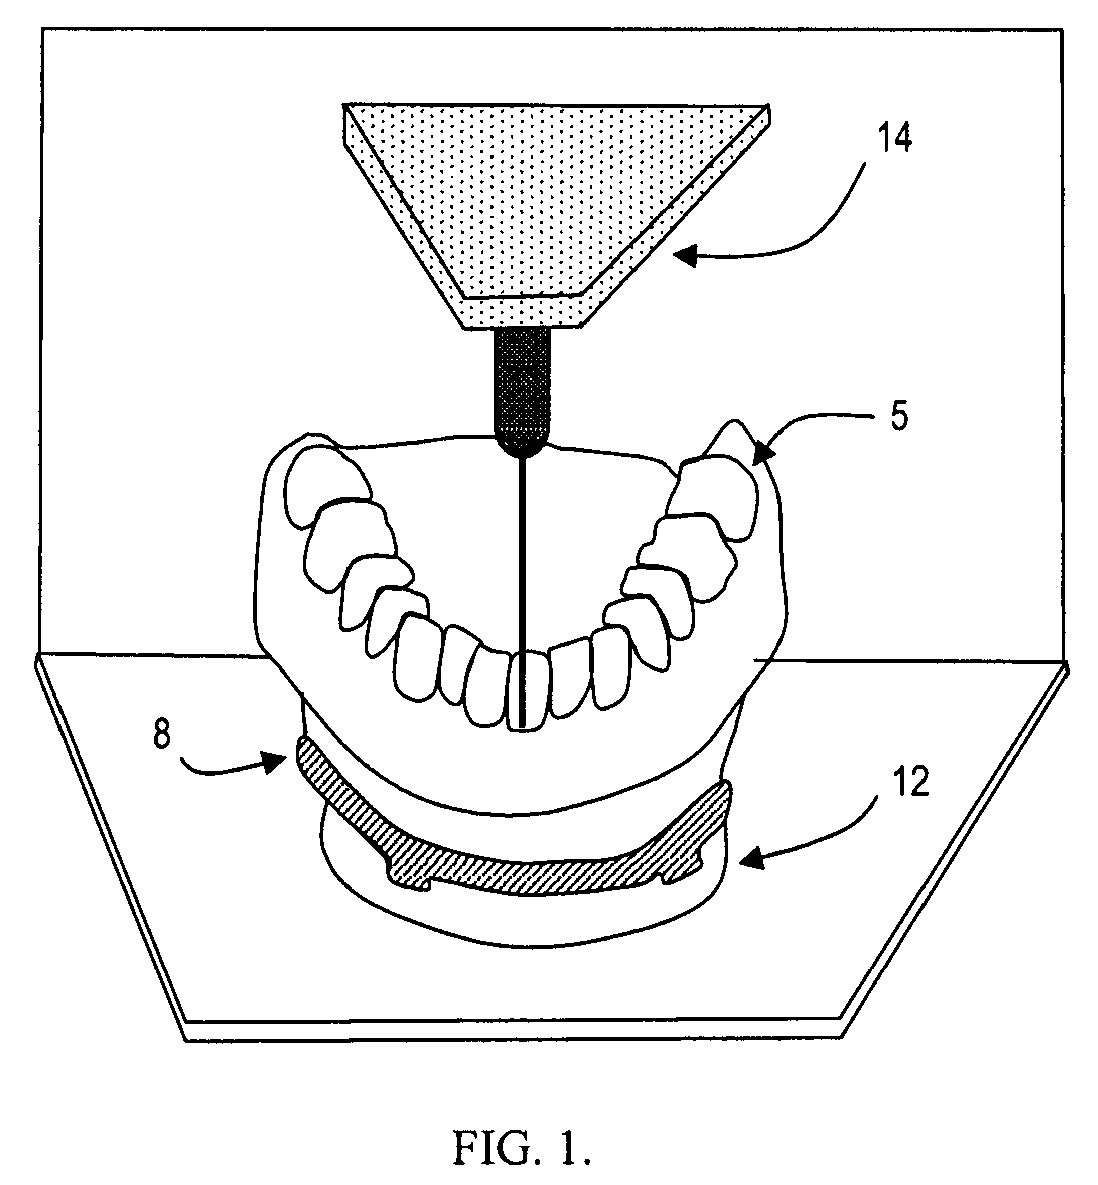 Surgical guides and methods for positioning artificial teeth and dental implants